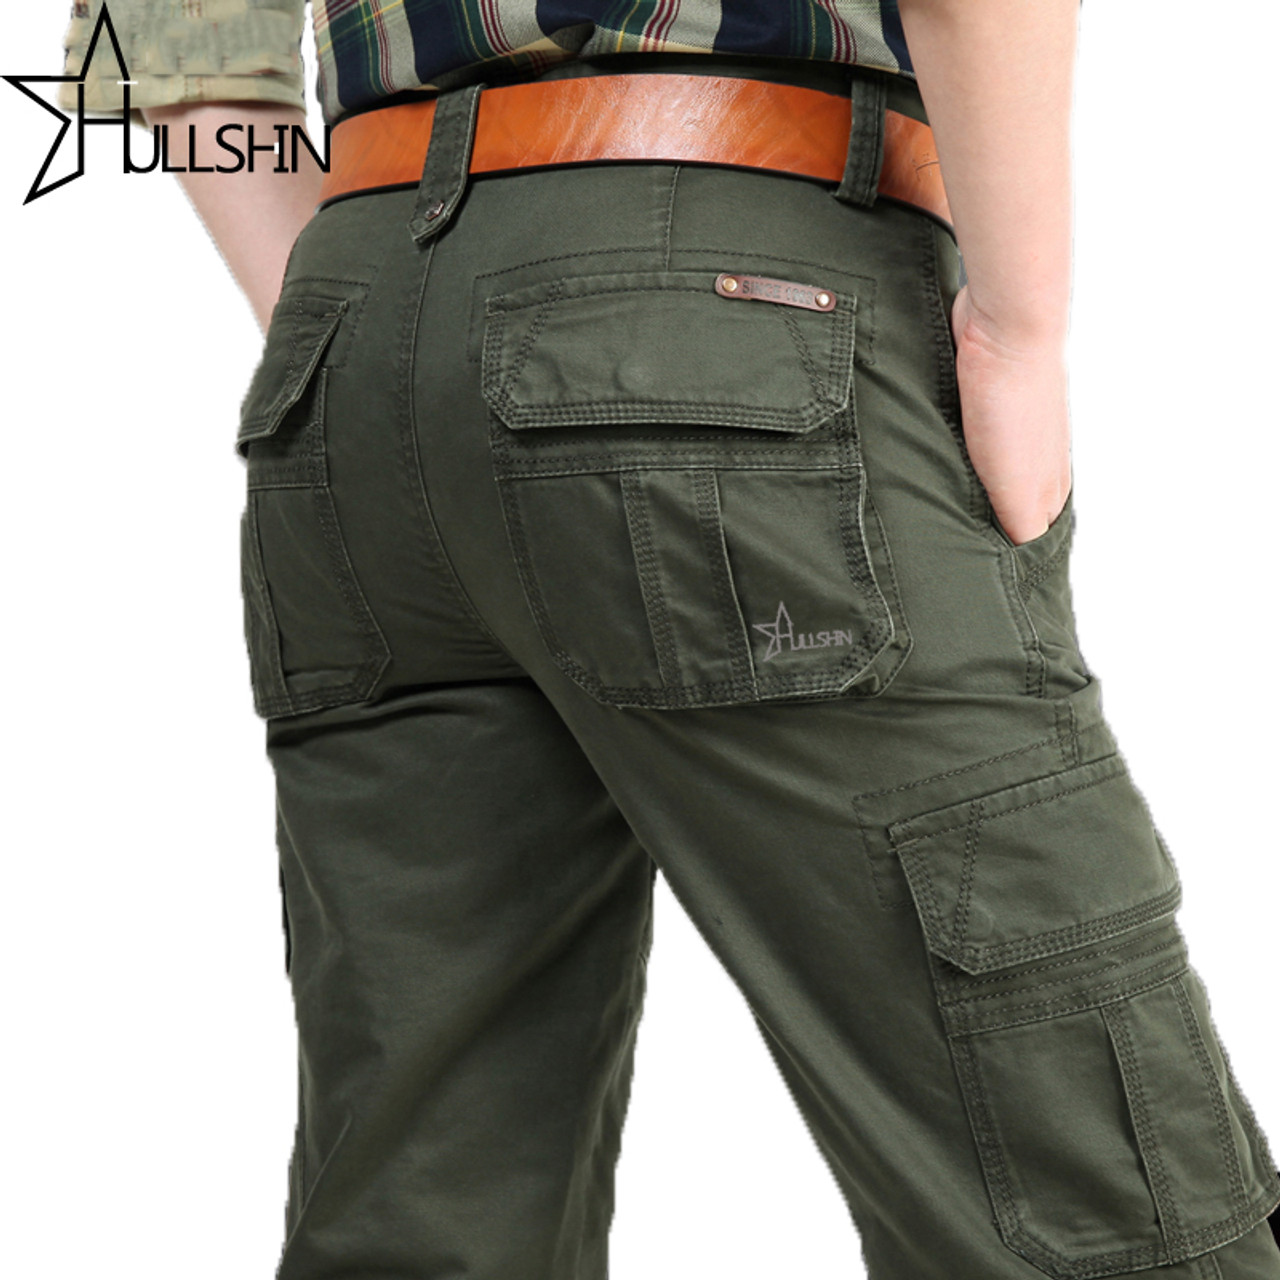 Mens Branded Cargo Pants at Rs 850/piece | Cargo Pant for Men in  Visakhapatnam | ID: 21605900673